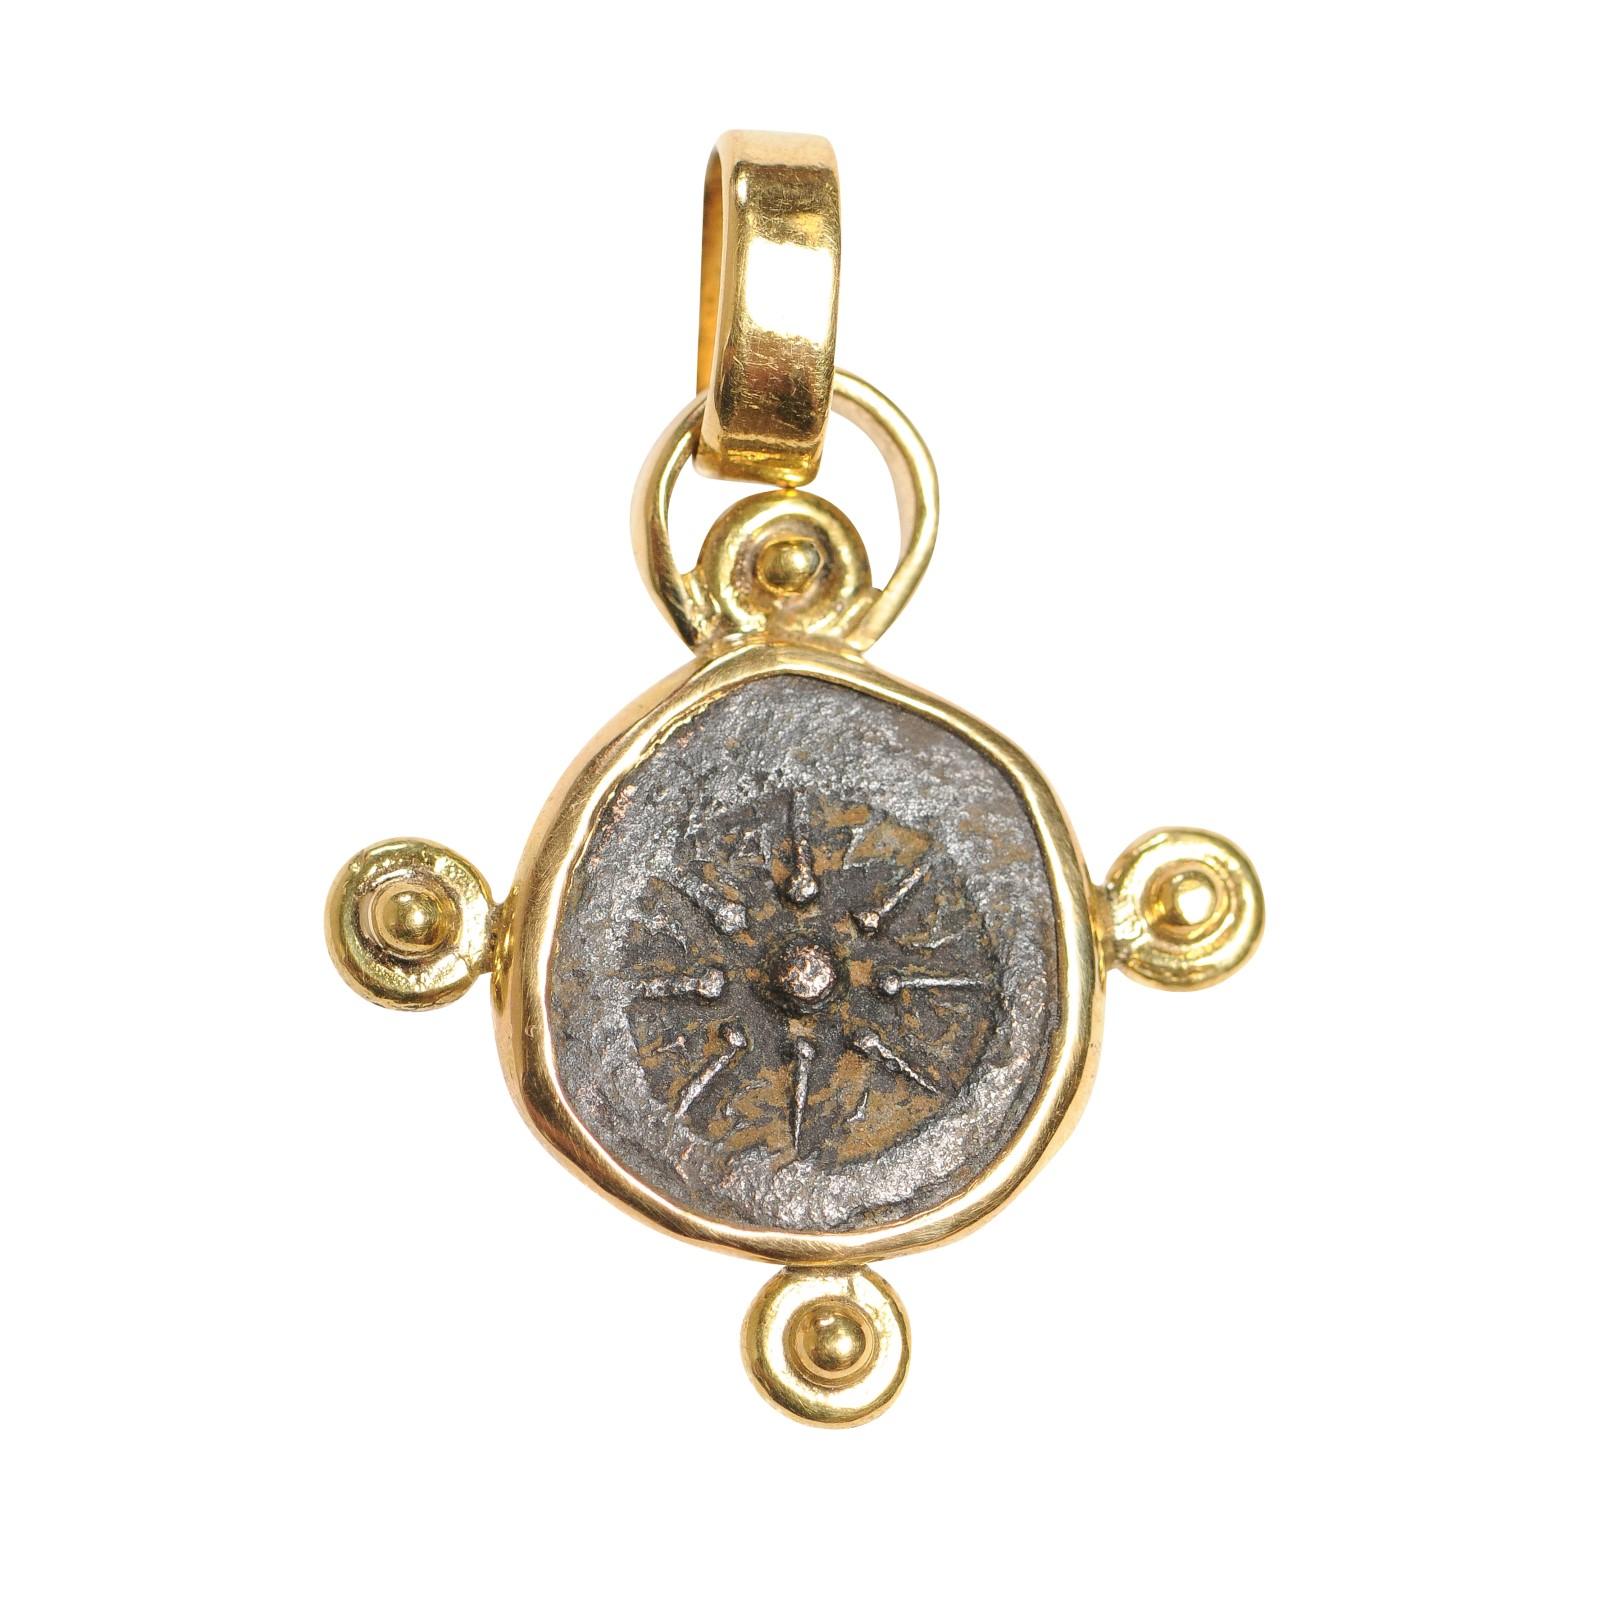 An Authentic Roman Bronze Widow's Mite Coin, Alexander Jannaeus, the Hasmonean King of Judaea (103 to 76 BC) Prutah to 200 AD, set in a custom 22k gold bezel with 22kt gold bail. Pendant measures approximately 15/16